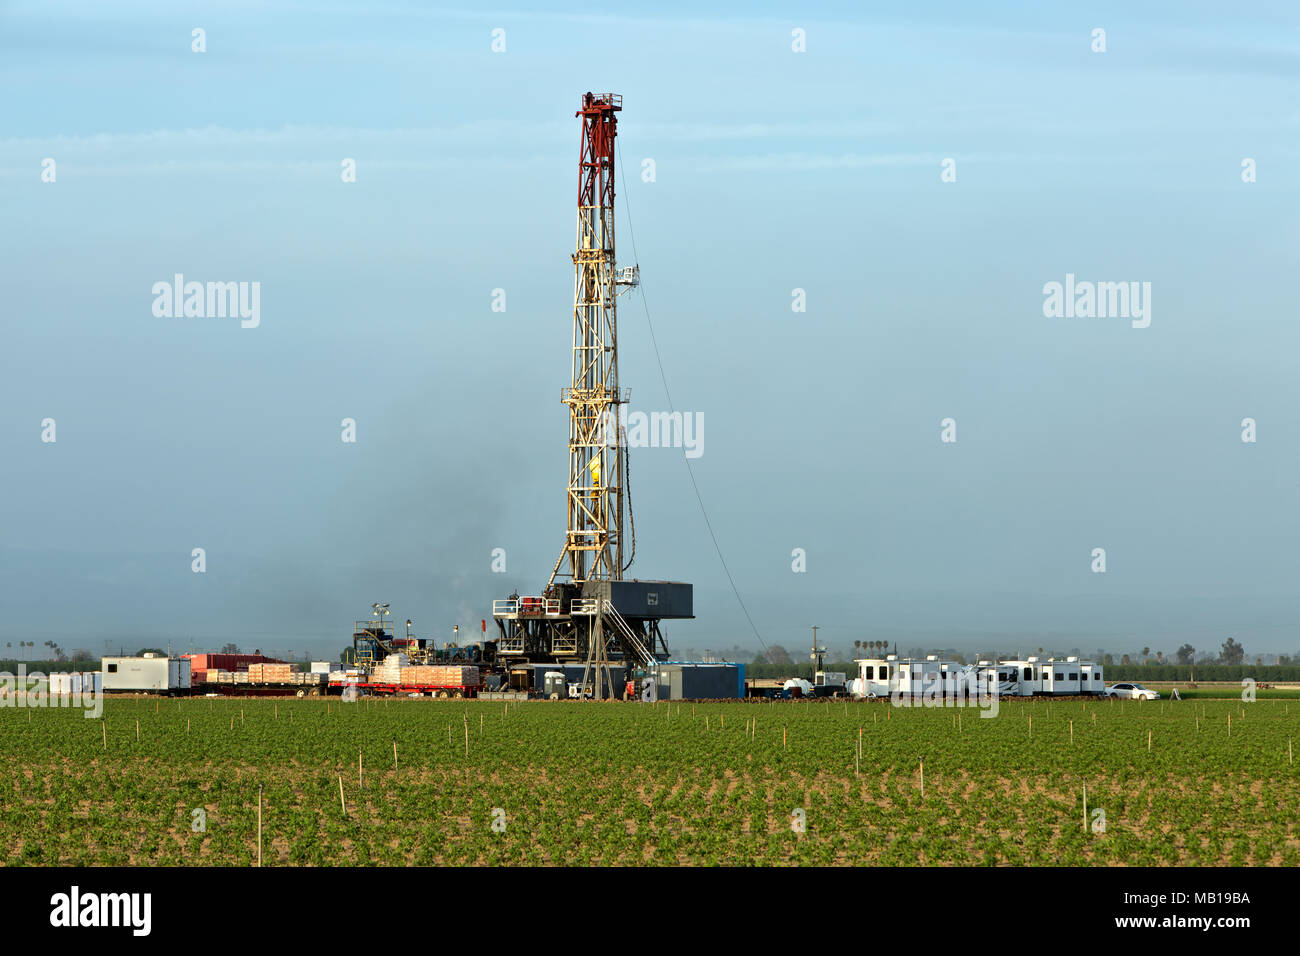 Drilling rig operating in productive tomato field in foreground. Stock Photo